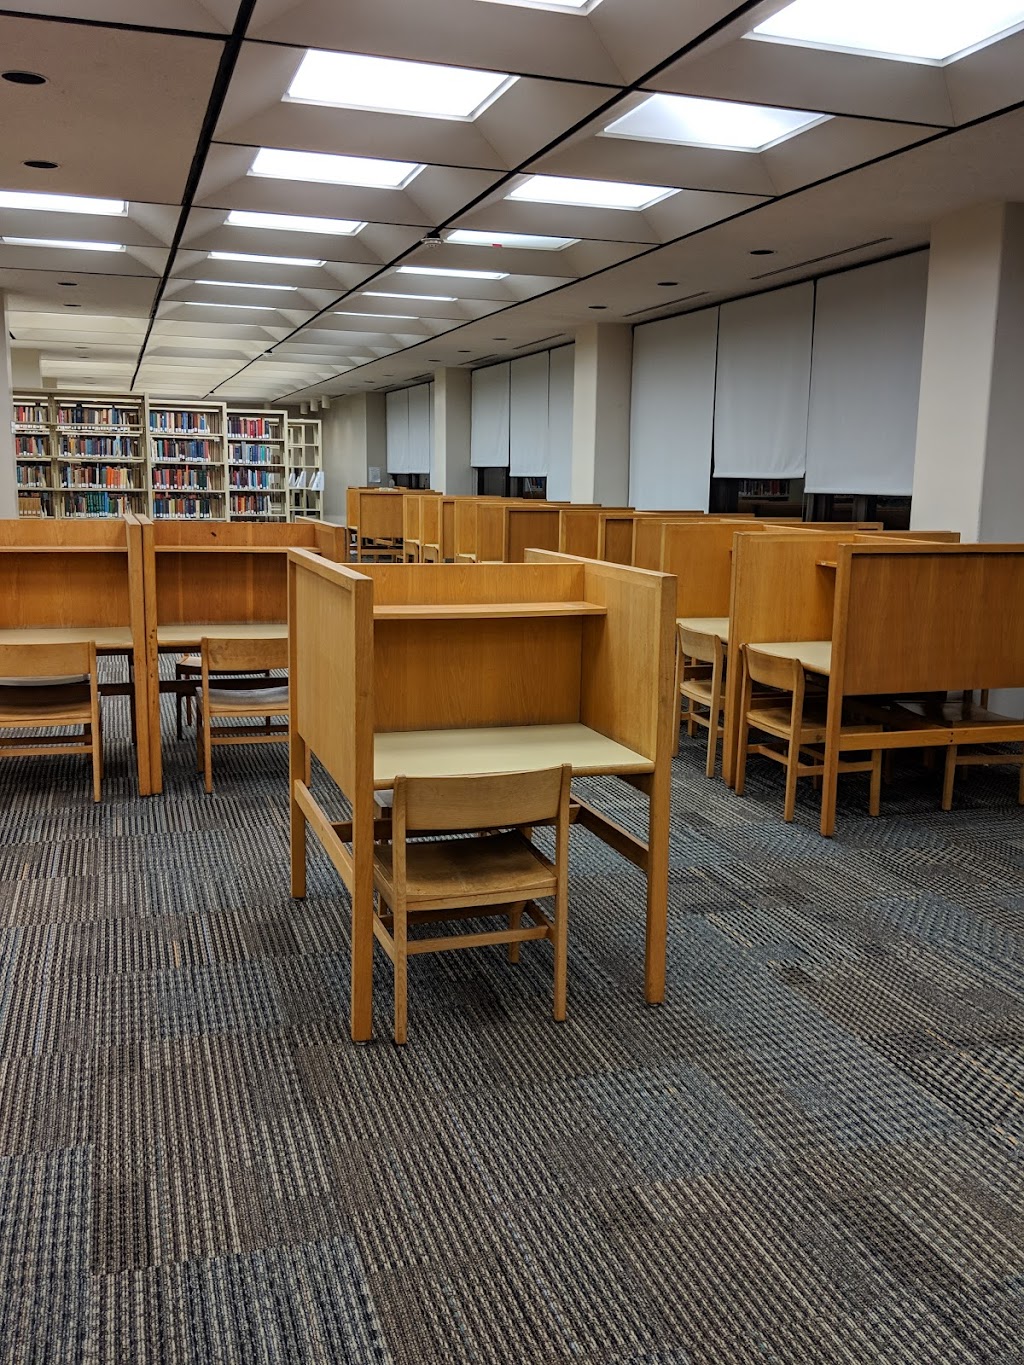 Wahlstrom Library | 126 Park Ave, Bridgeport, CT 06604 | Phone: (203) 576-4740